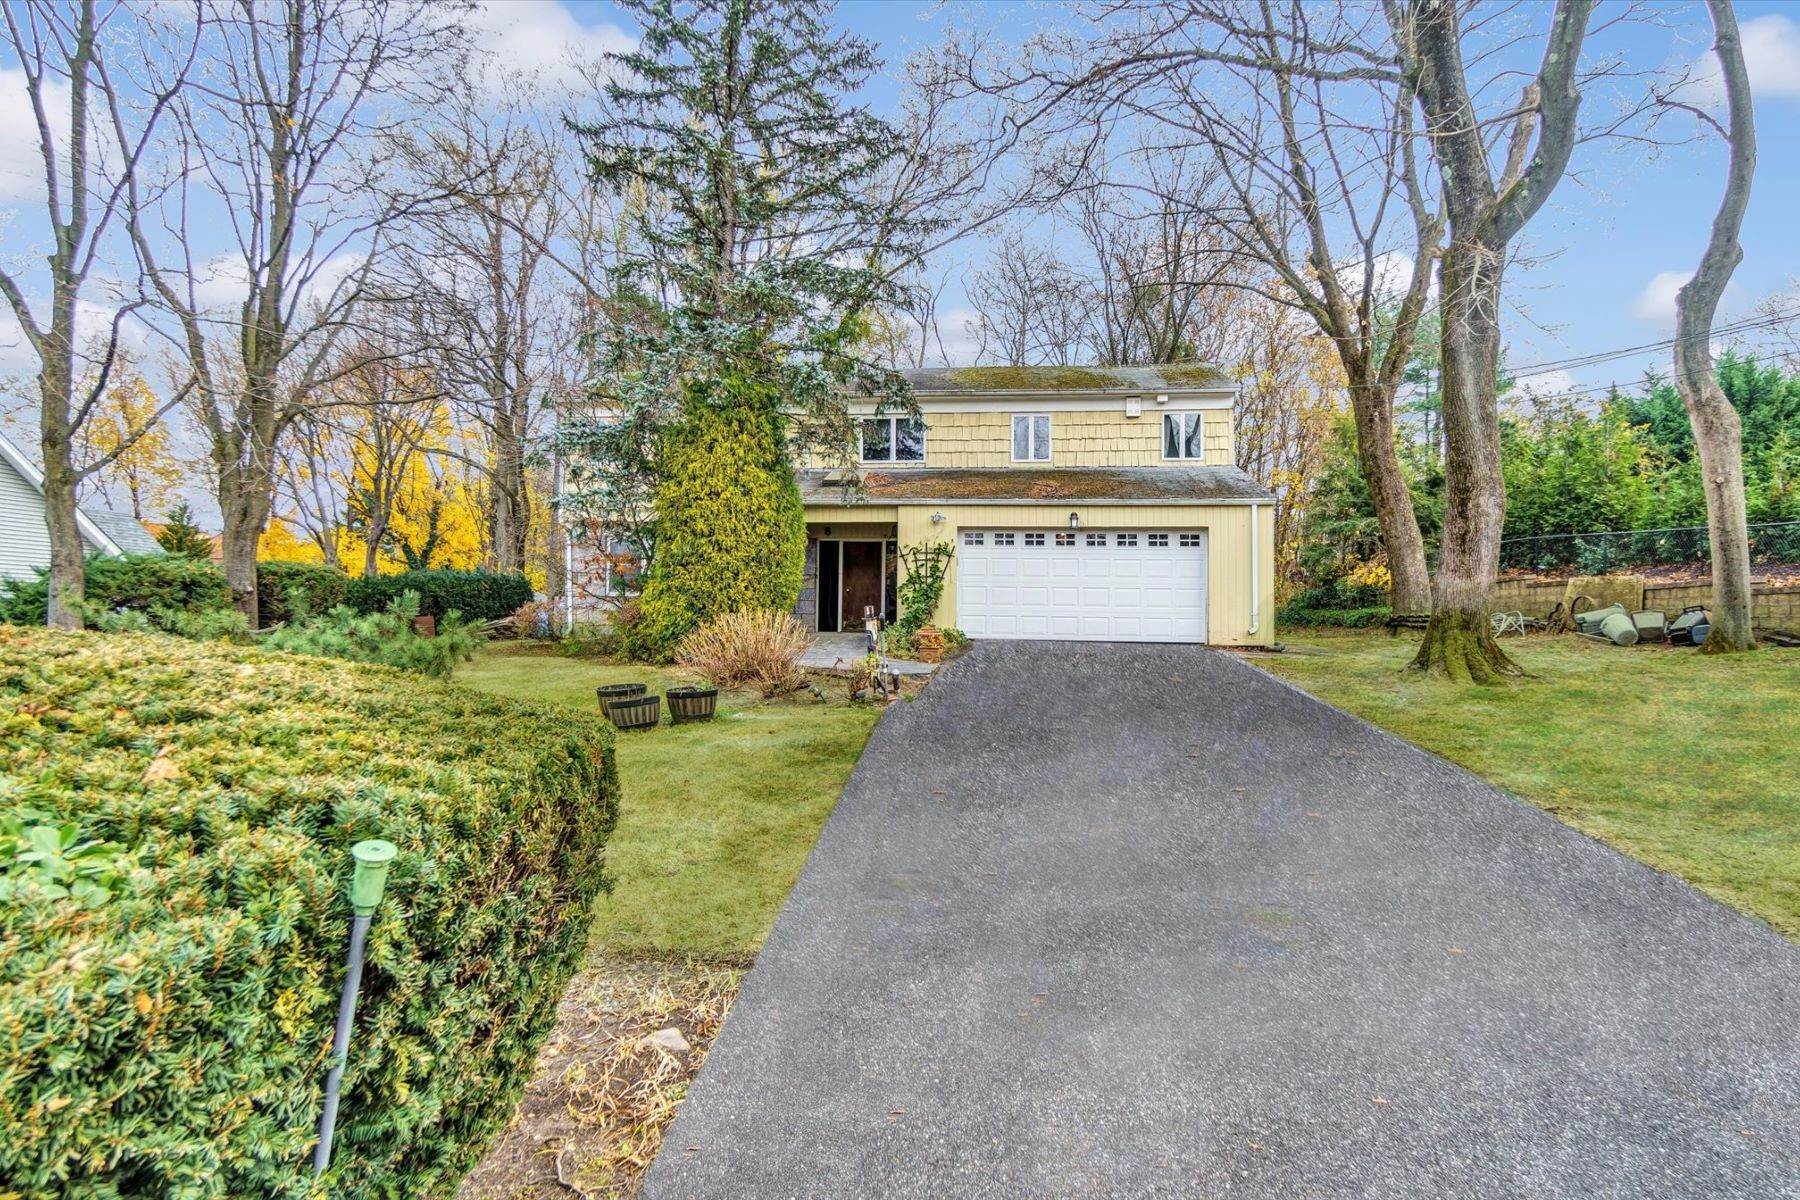 Single Family Homes for Sale at 2 Fairview Lane, Glen Cove, NY, 11542 2 Fairview Lane Glen Cove, New York 11542 United States